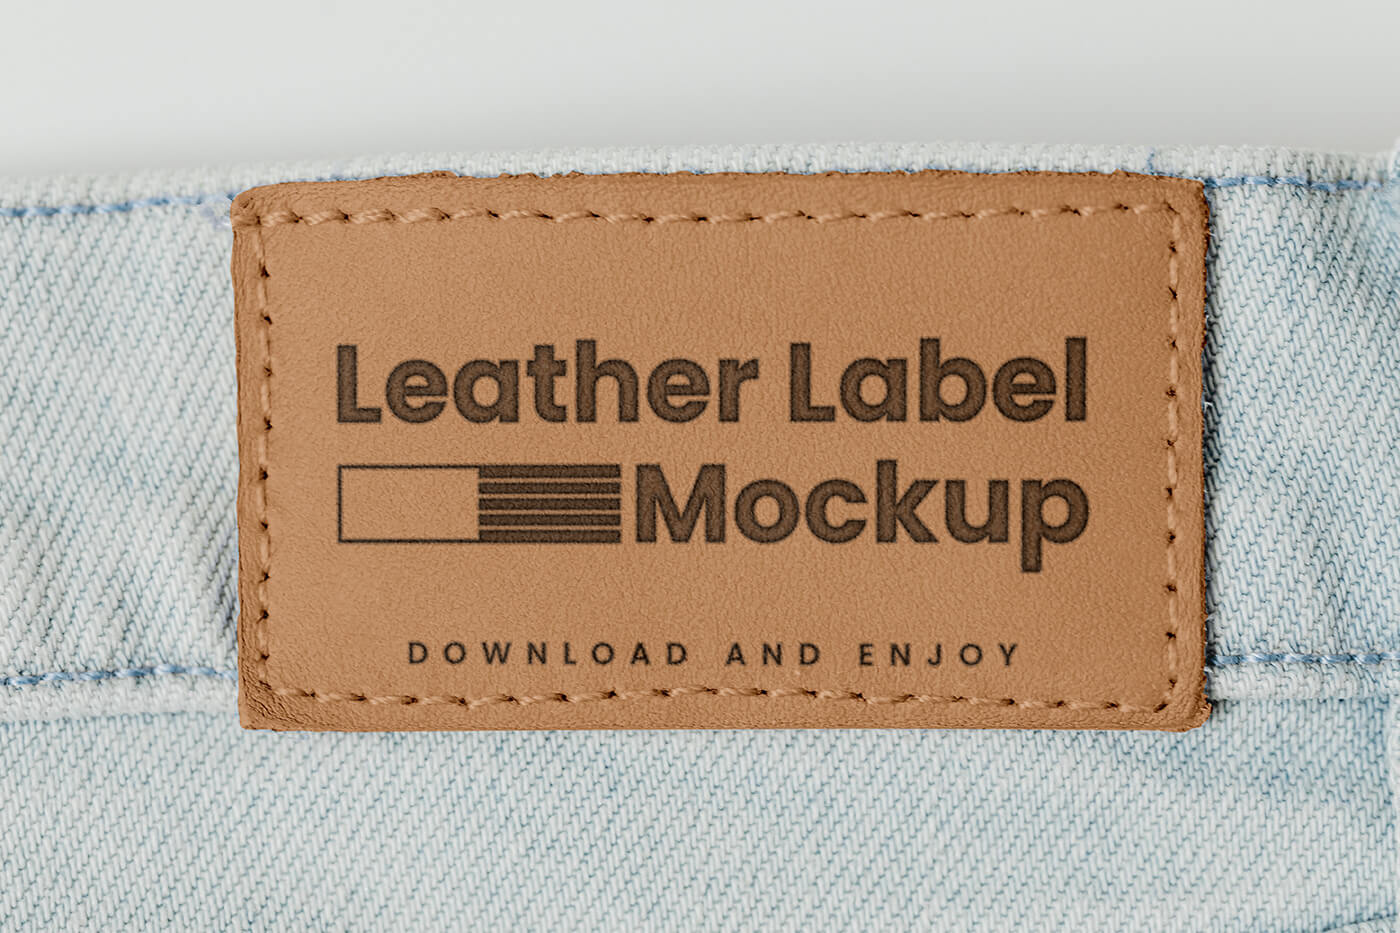 Free Jean Pant Leather Label Mockup - PsFiles